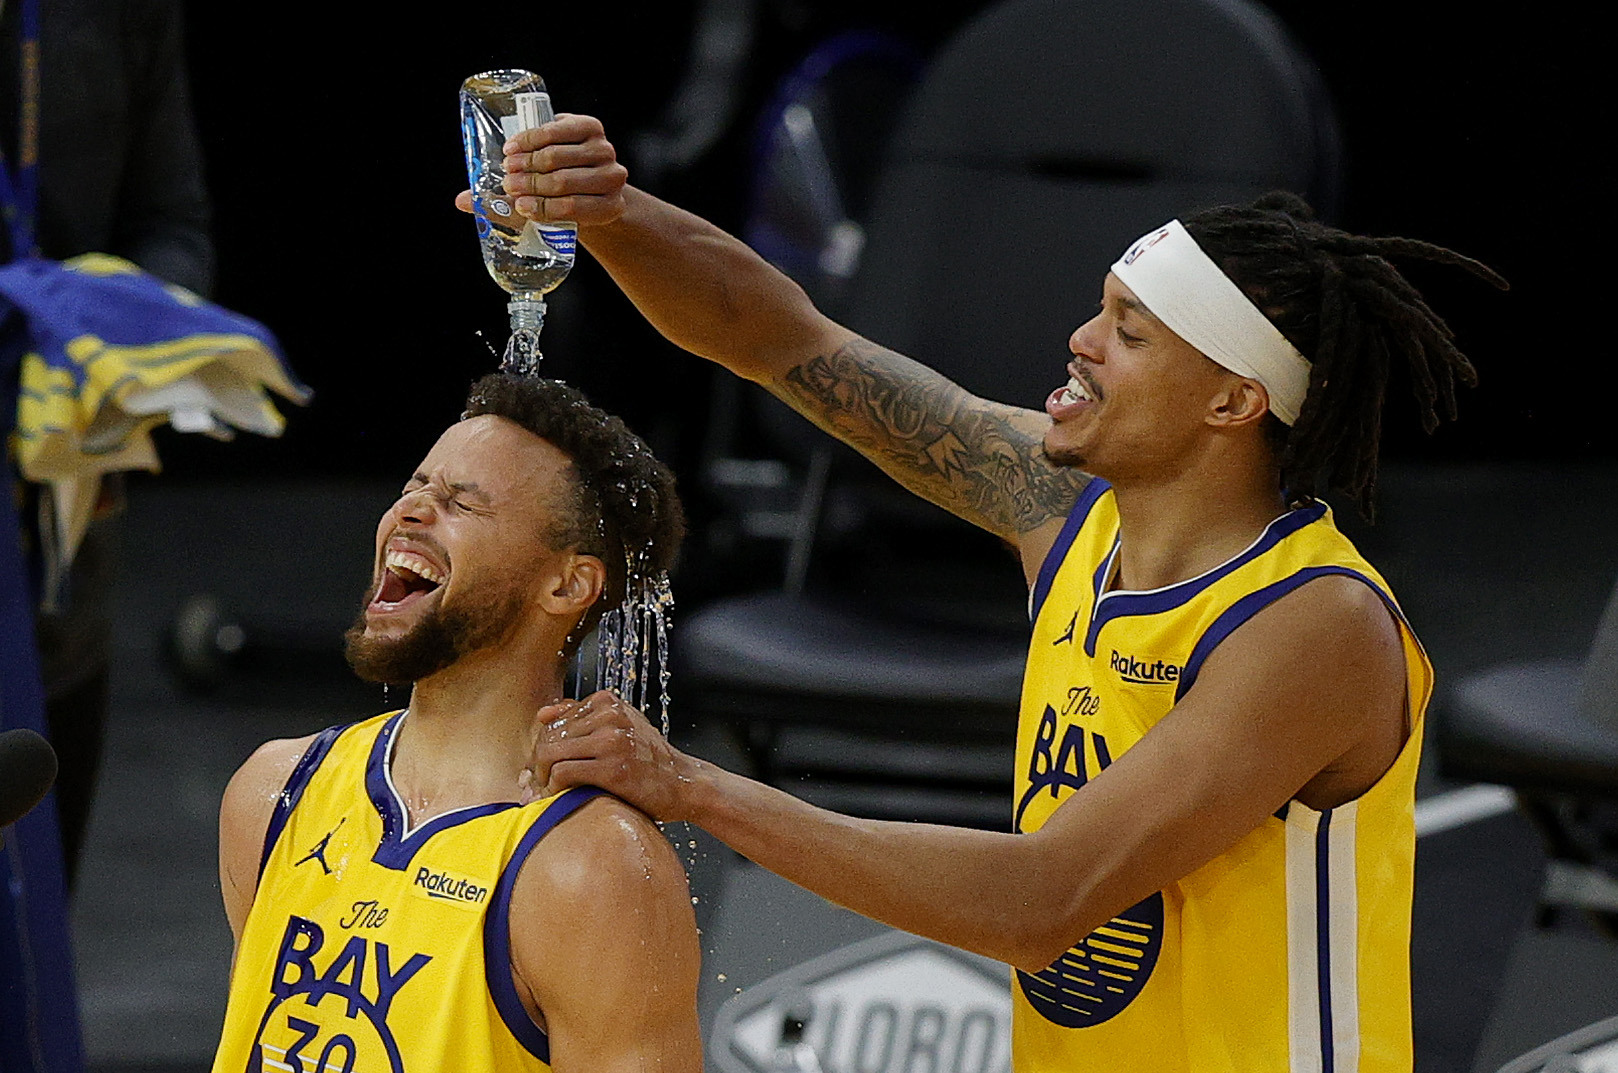 Steph Curry Responds To Haters By Dropping 62 Points On The Trail Blazers